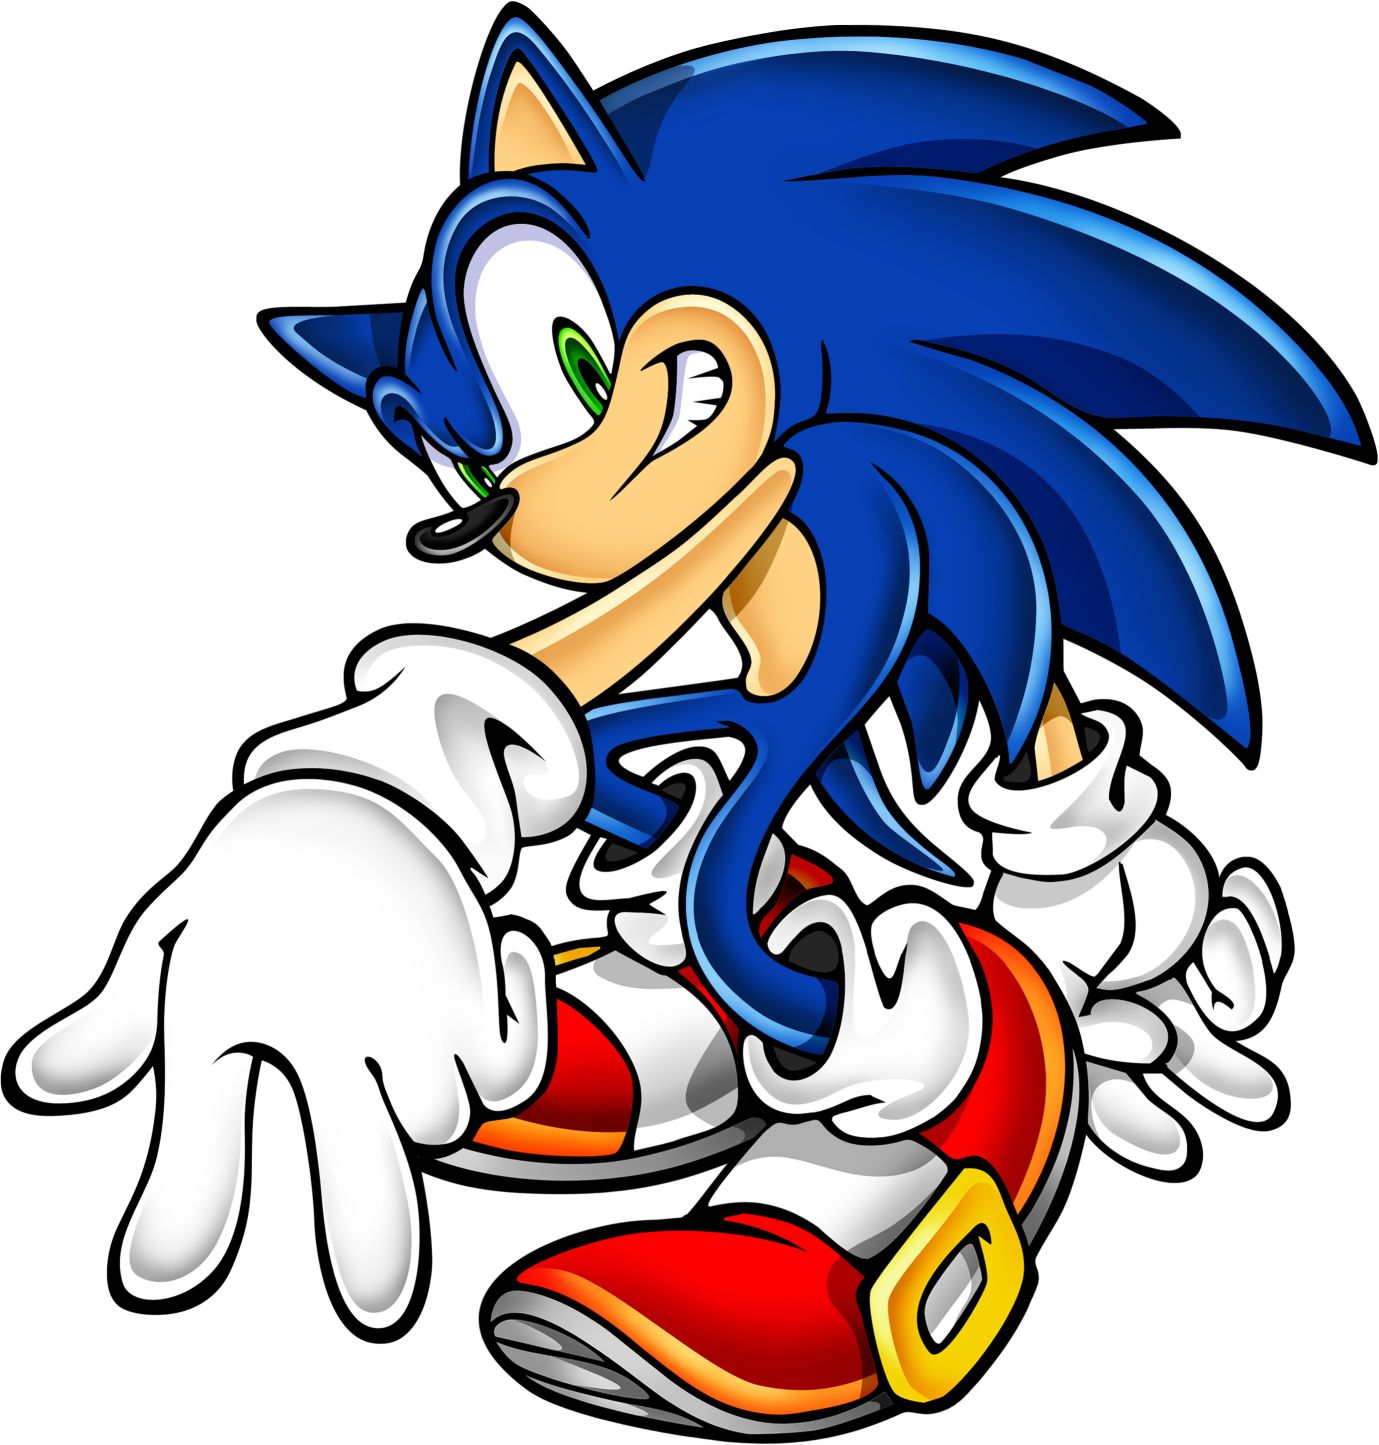 sony-is-making-a-live-action-cgi-sonic-the-hedgehog-movie-double